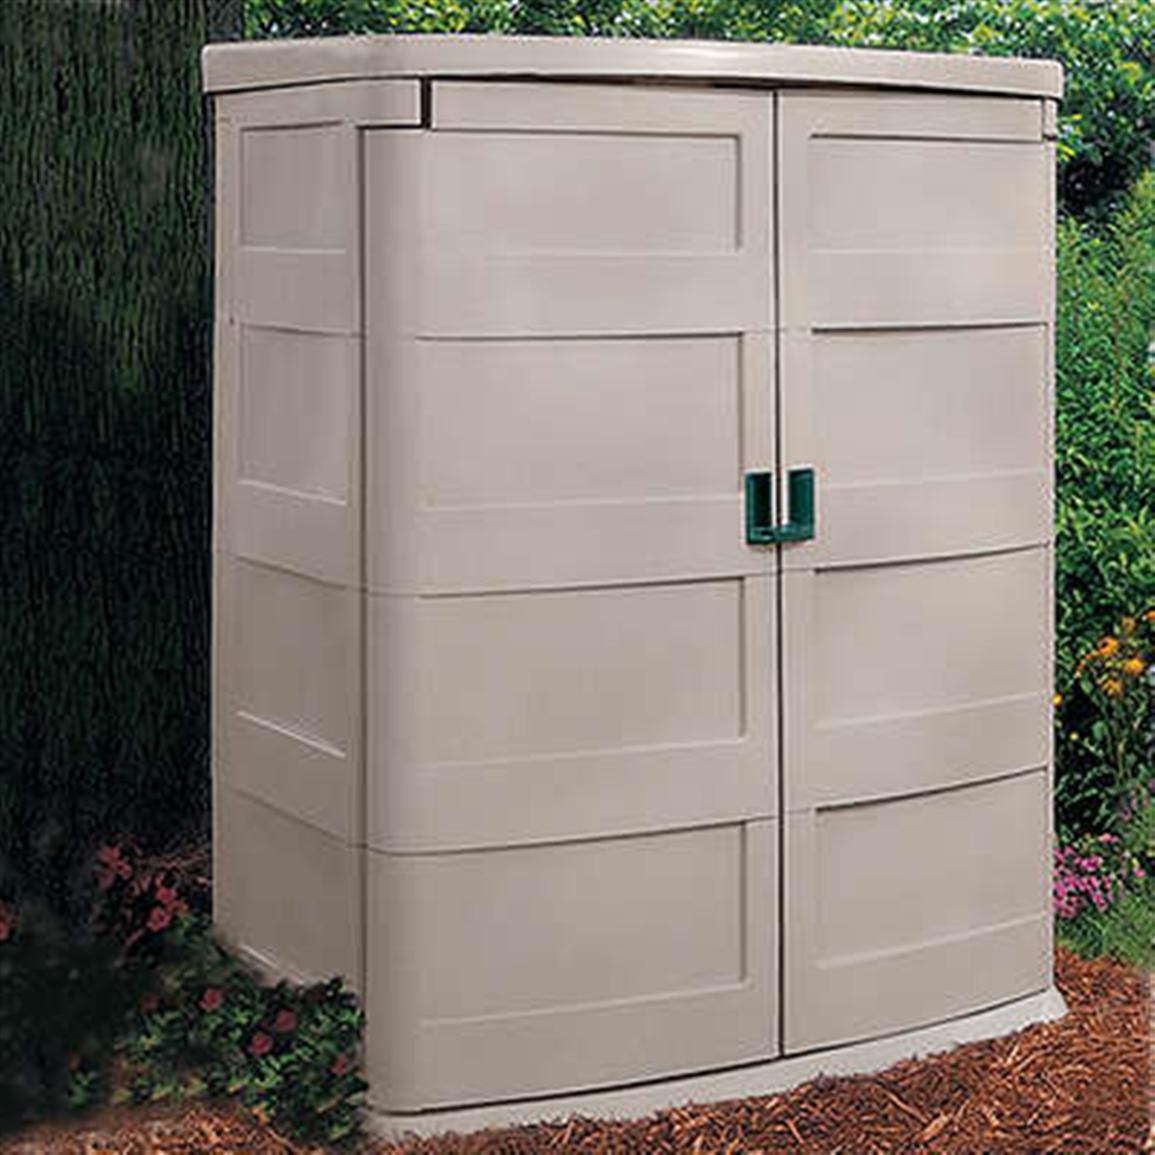 Suncast® Vertical Garden Shed - 138476, Patio Storage at Sportsman's Guide